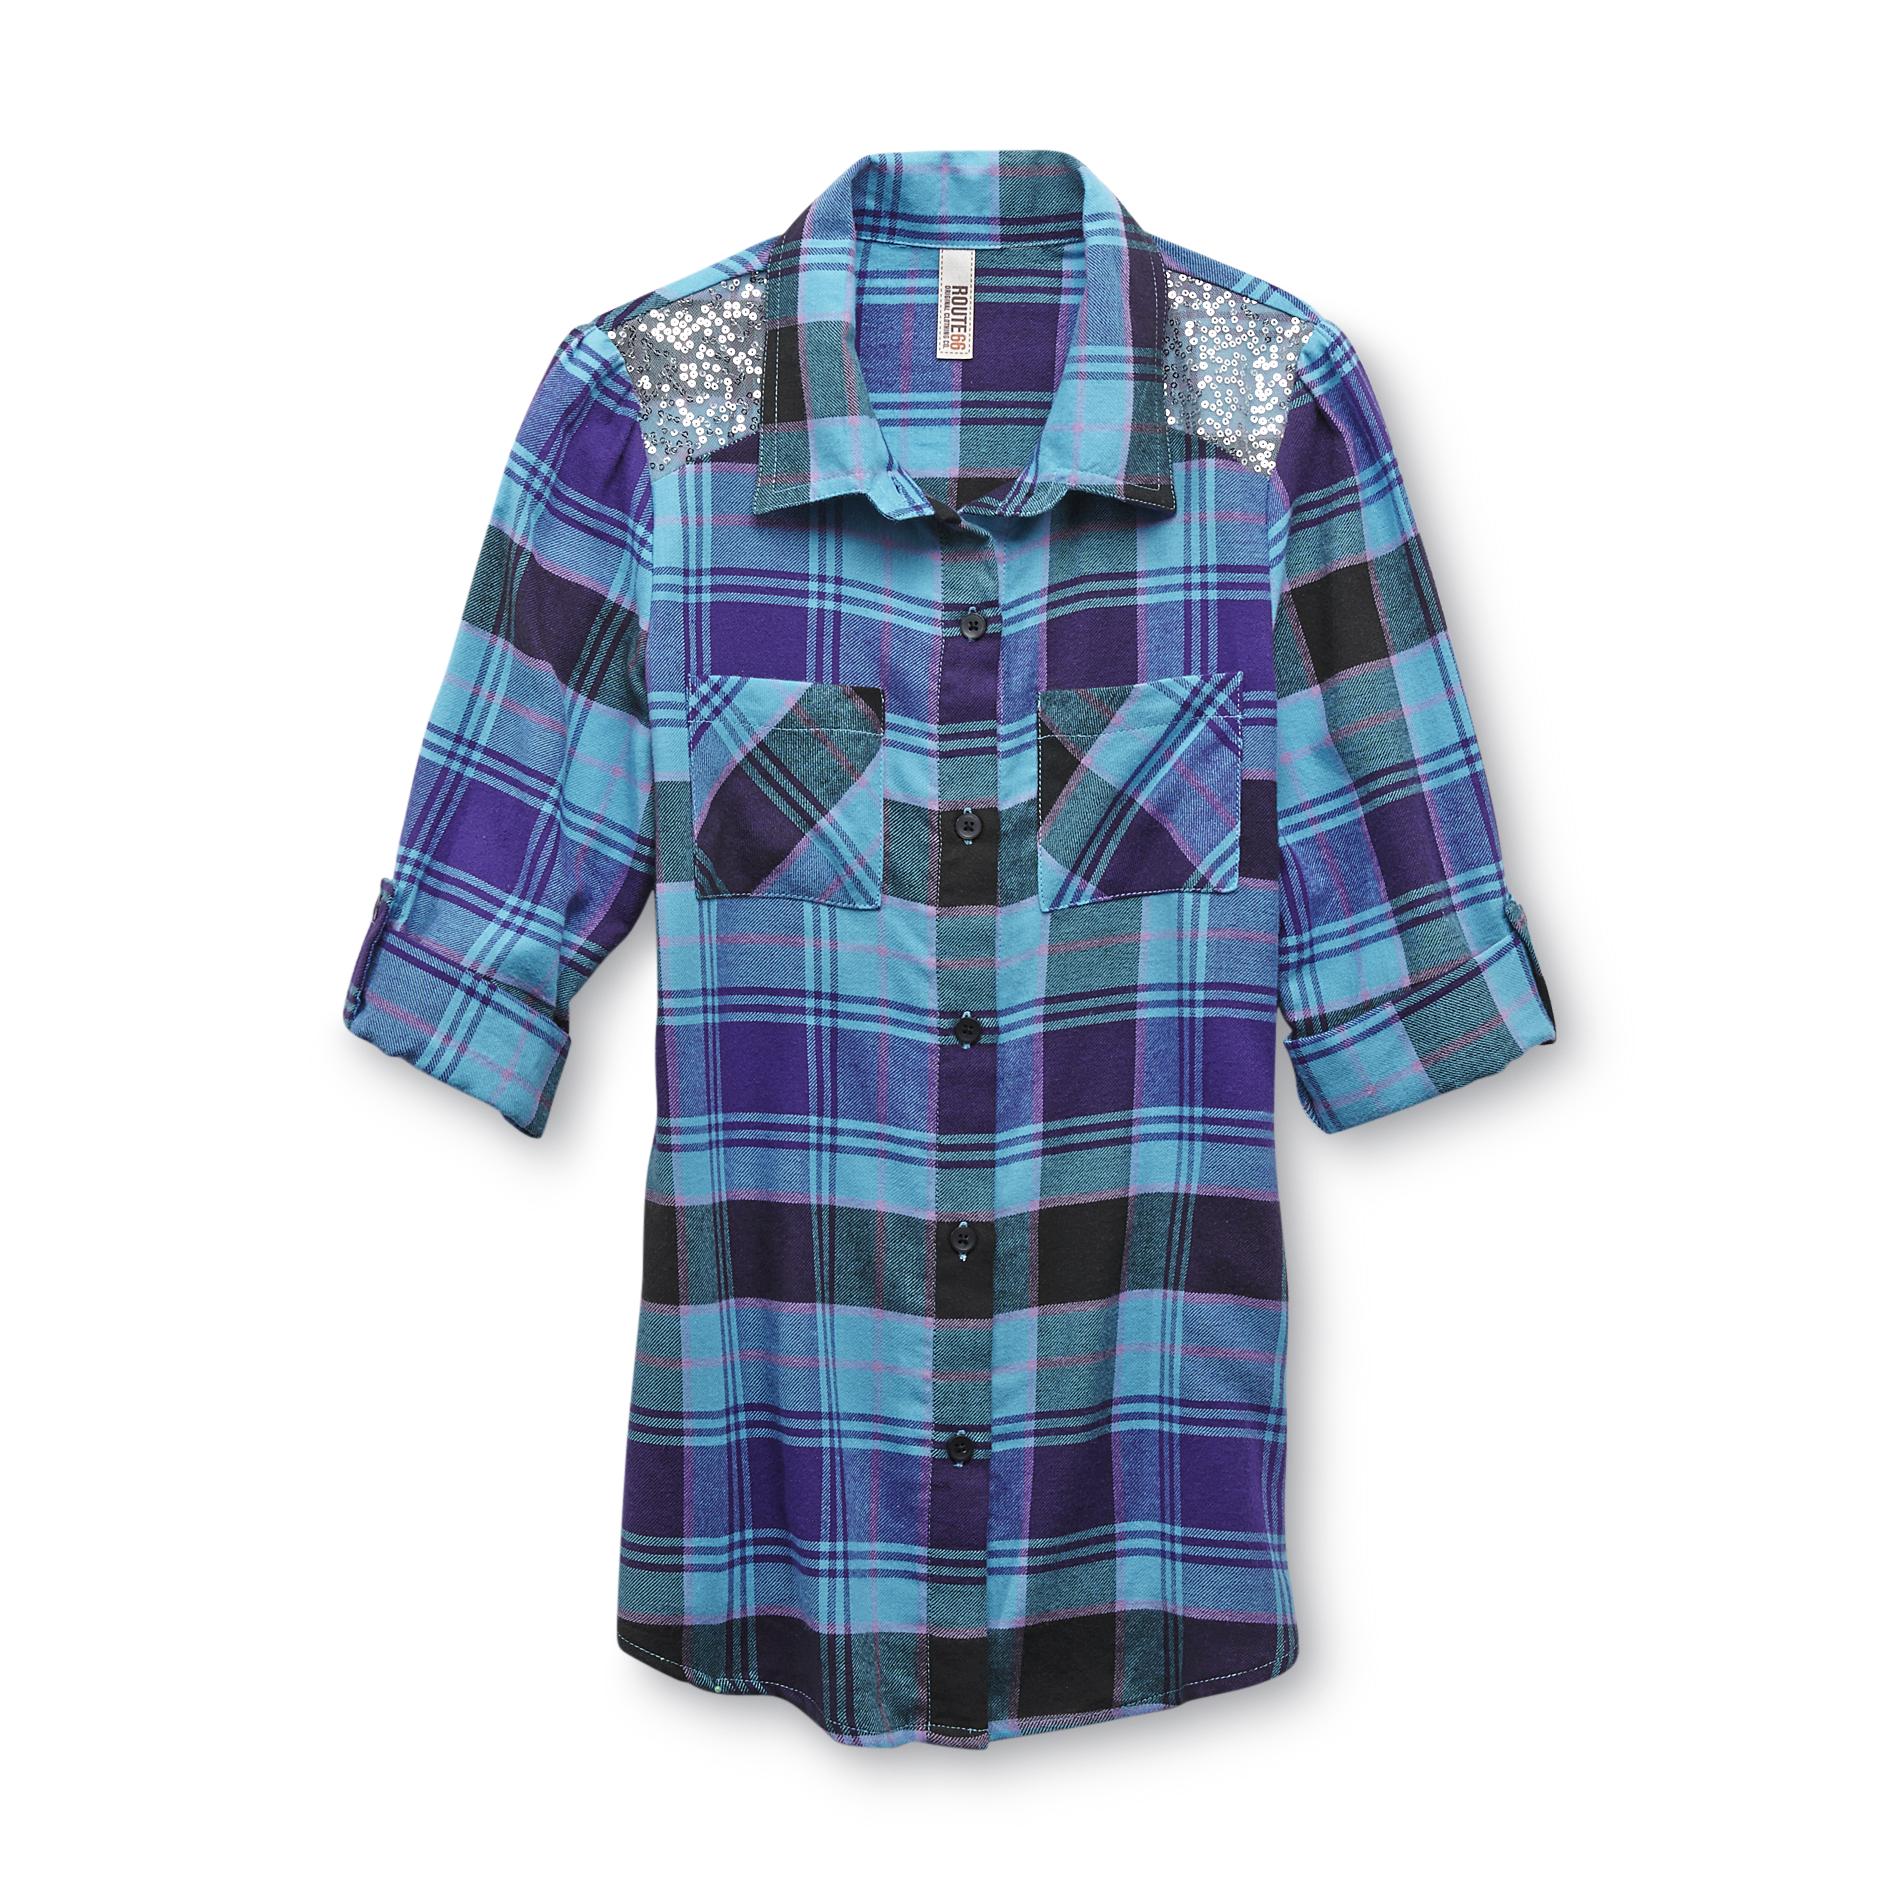 Route 66 Girl's Embellished Flannel Shirt - Plaid